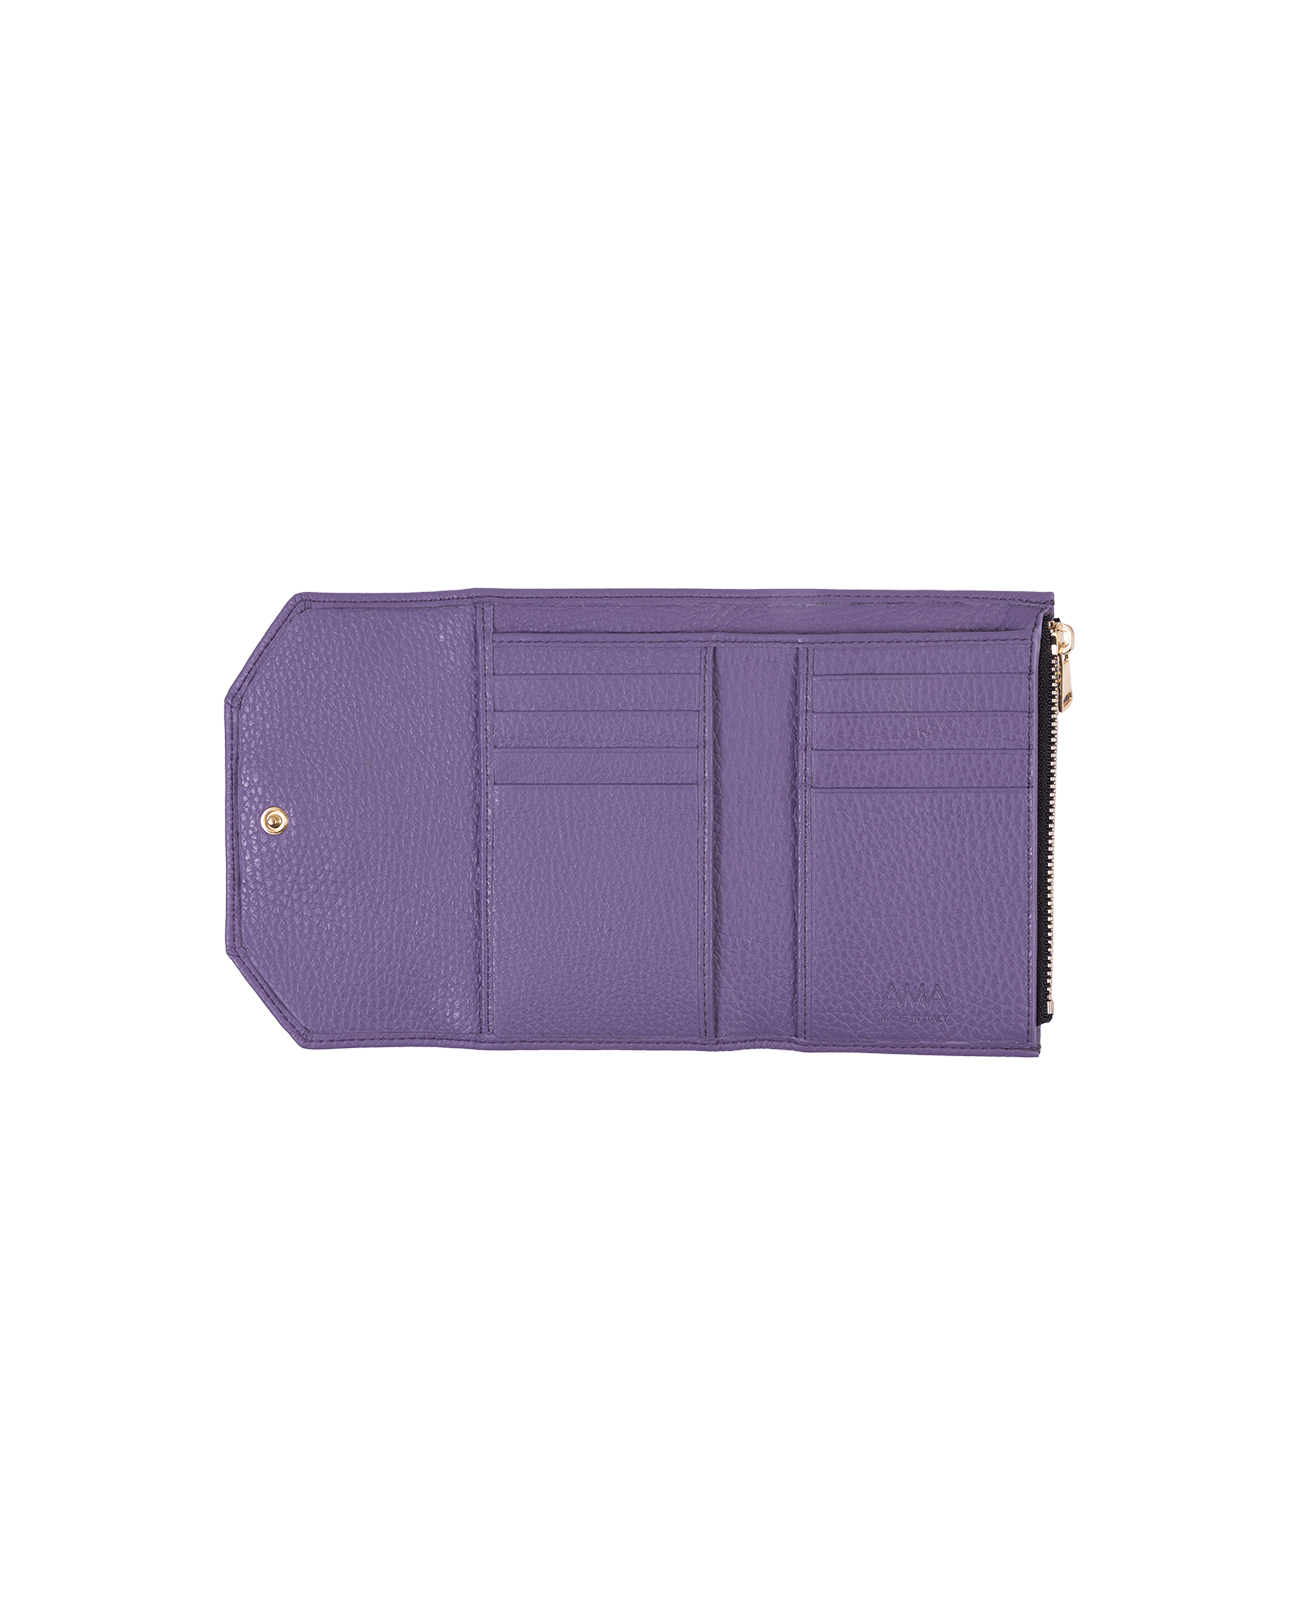 Wallet in Italian full-grain leather. Designed to carry your personal items. Available in a variety of styles and designs. Color: Purple. Size: Mini